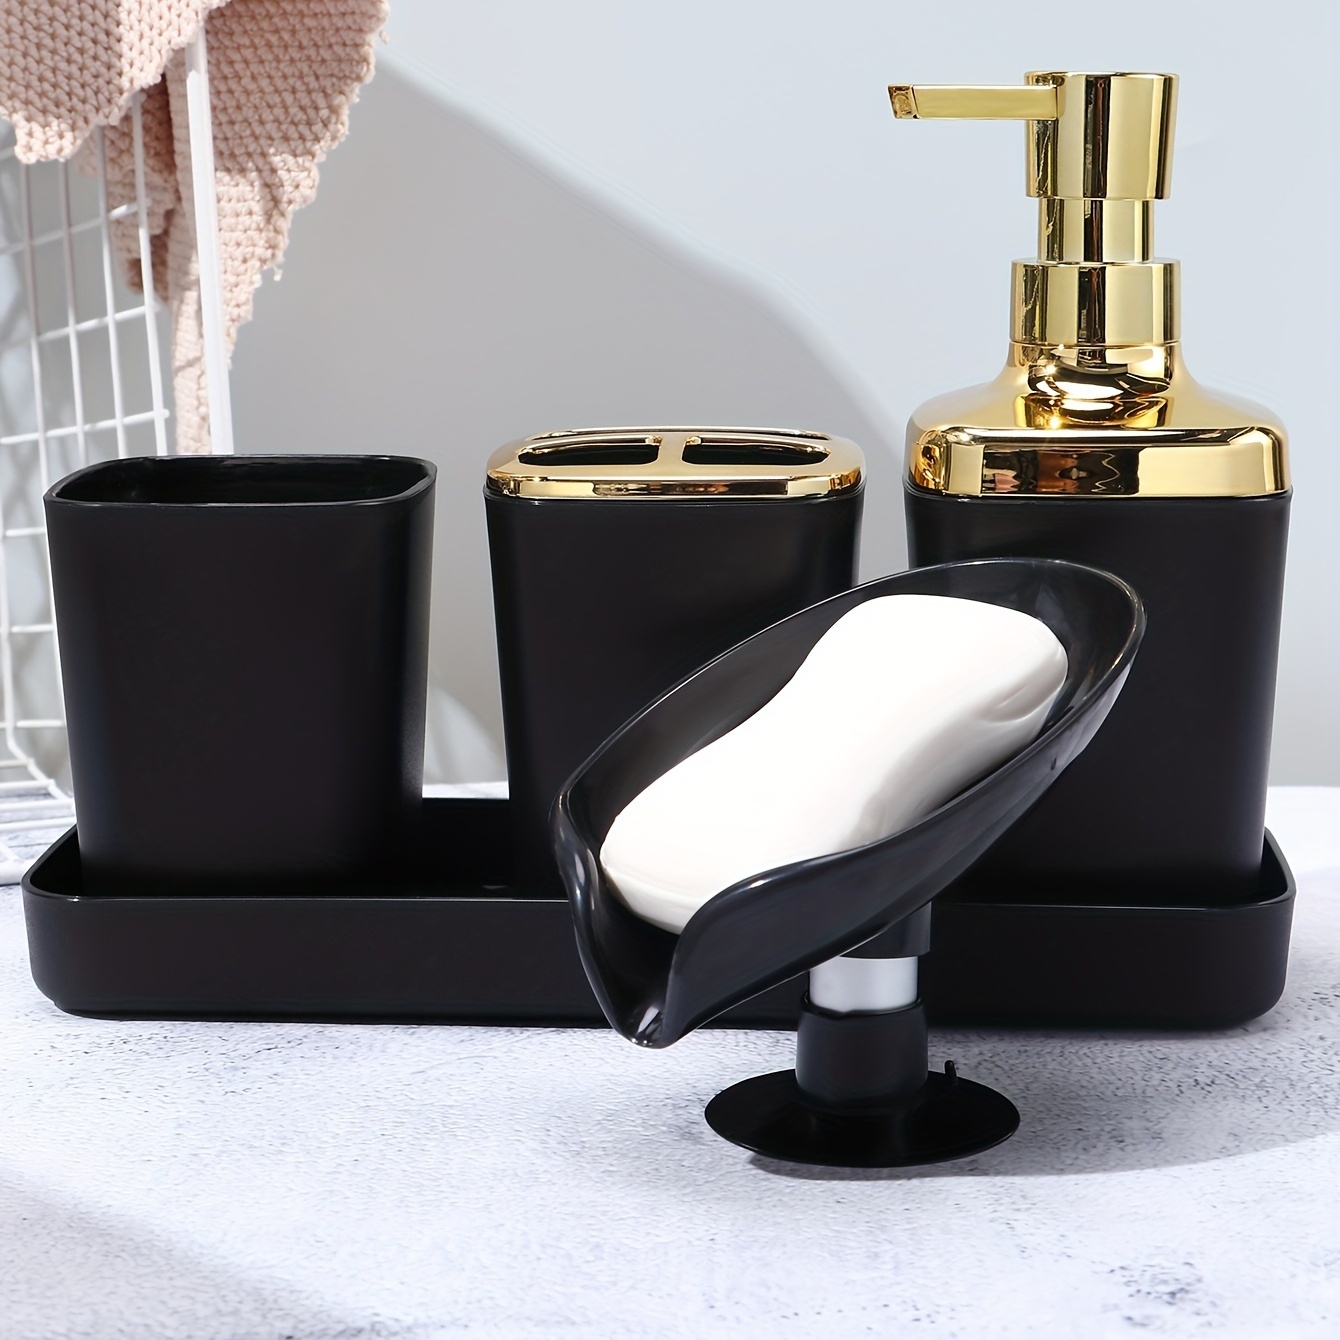 

5pcs Complete Bathroom Accessory Set - Includes Lotion Dispenser, Soap Dish Holder, Toothbrush Holder, Mouthwash Cup, And Tray - Perfect For Home Bathroom Organization